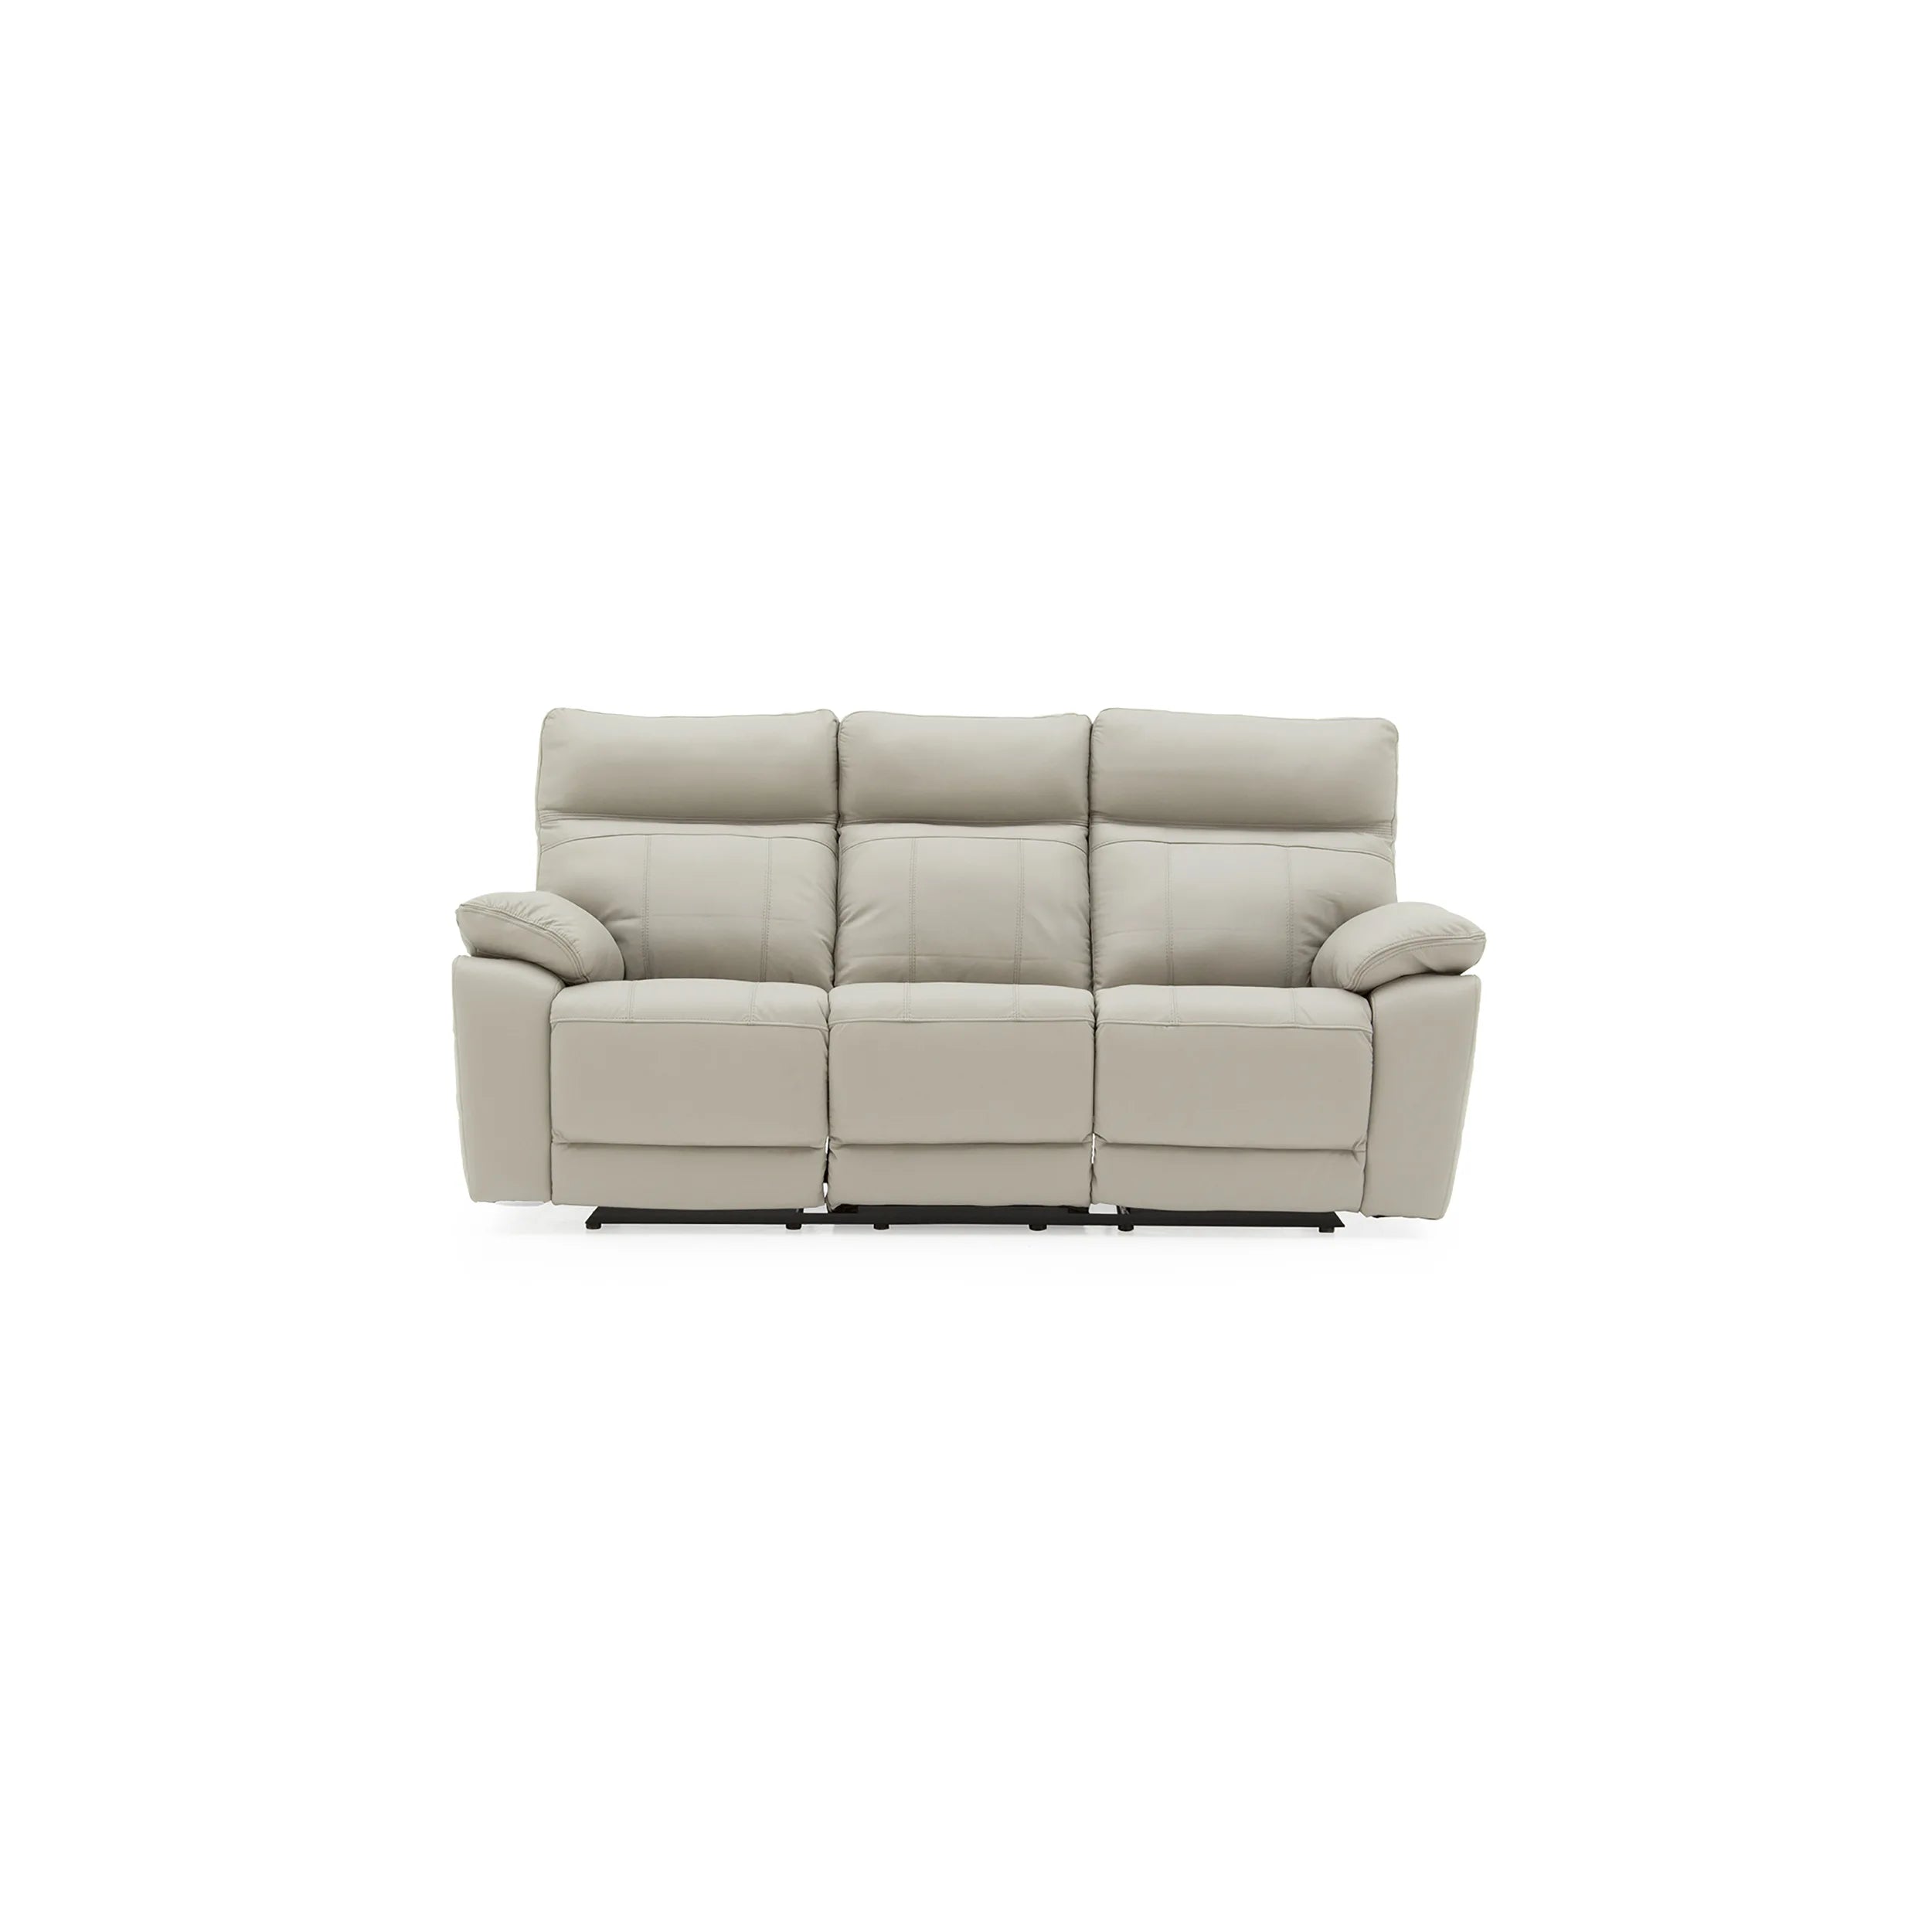 Positano Light Grey Leather 3 Seater Electric Recliner Sofa